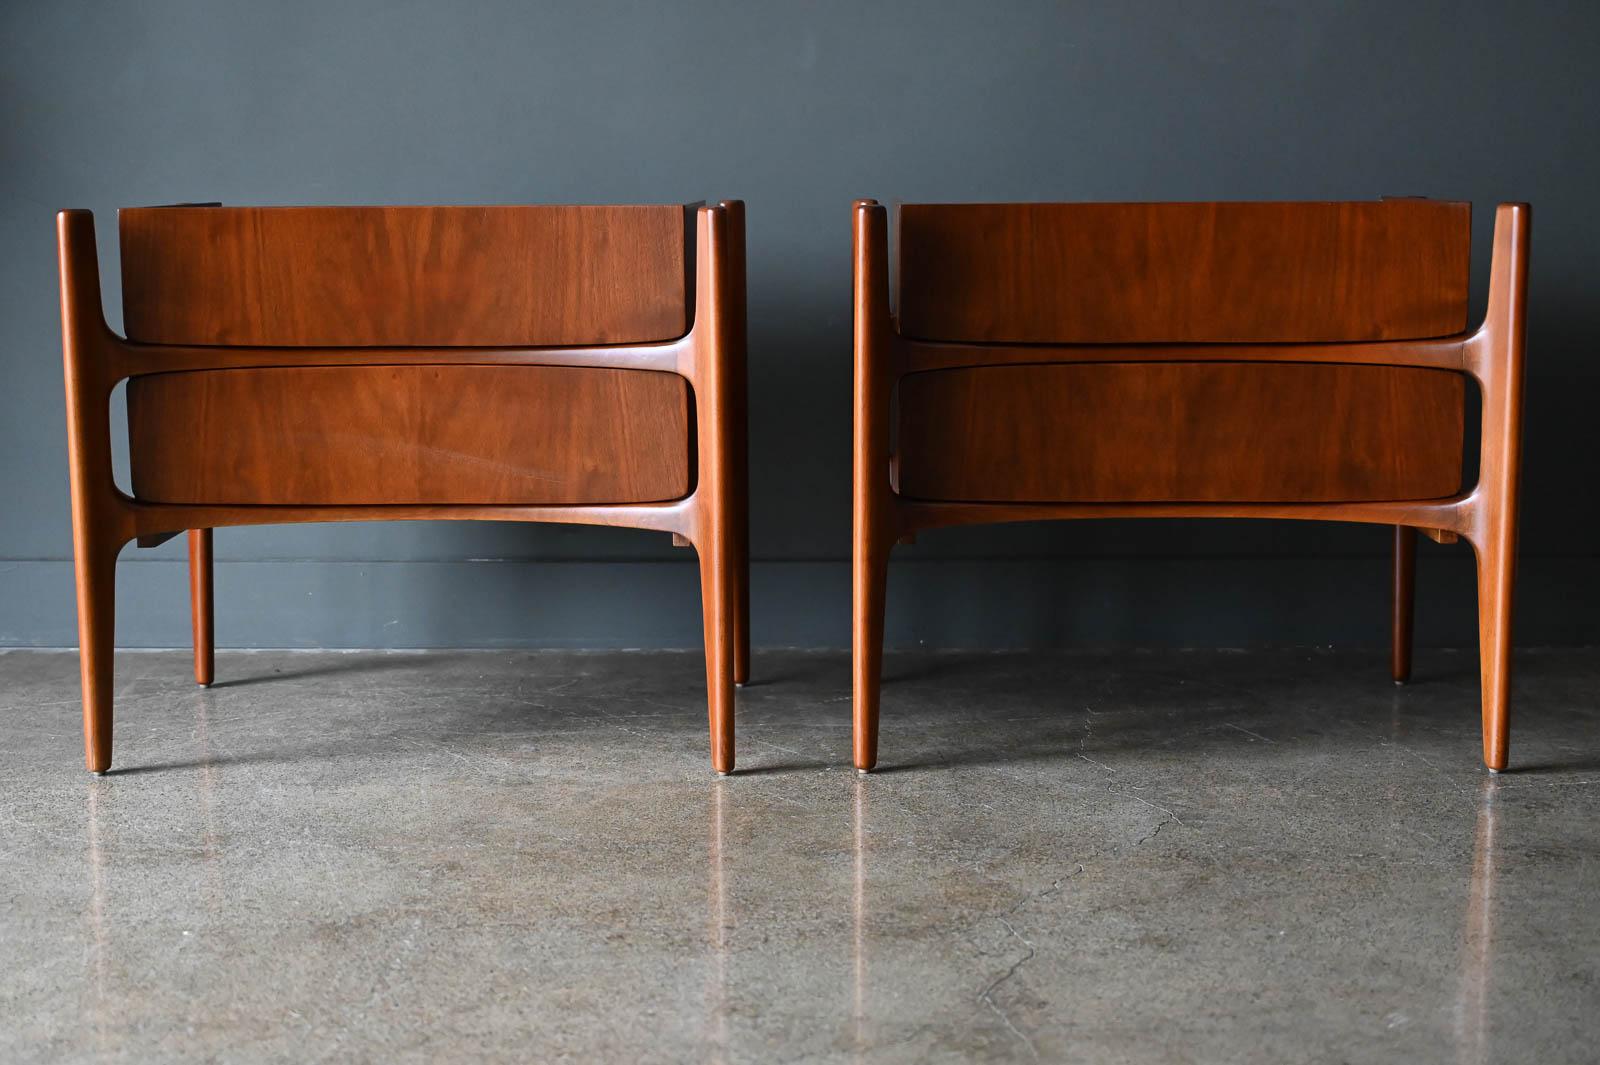 Pair of Walnut Sculpted Nightstands or End Tables by William Hinn, circa 1955. Beautiful sculpted exoskeleton with curved drawers. Professionally restored in showroom condition, pairs like these rarely come to market. Solid walnut legs with walnut